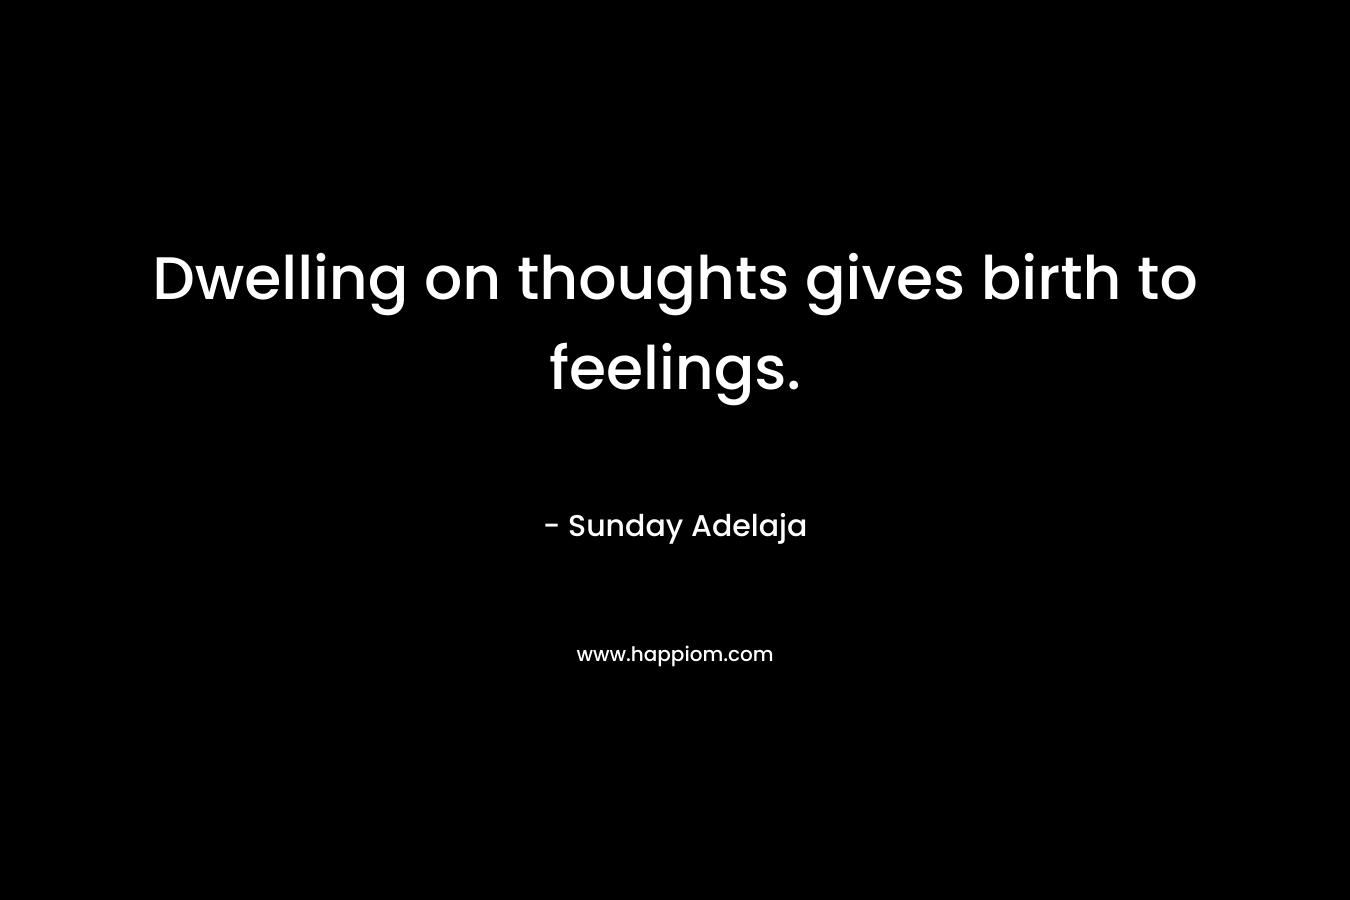 Dwelling on thoughts gives birth to feelings.